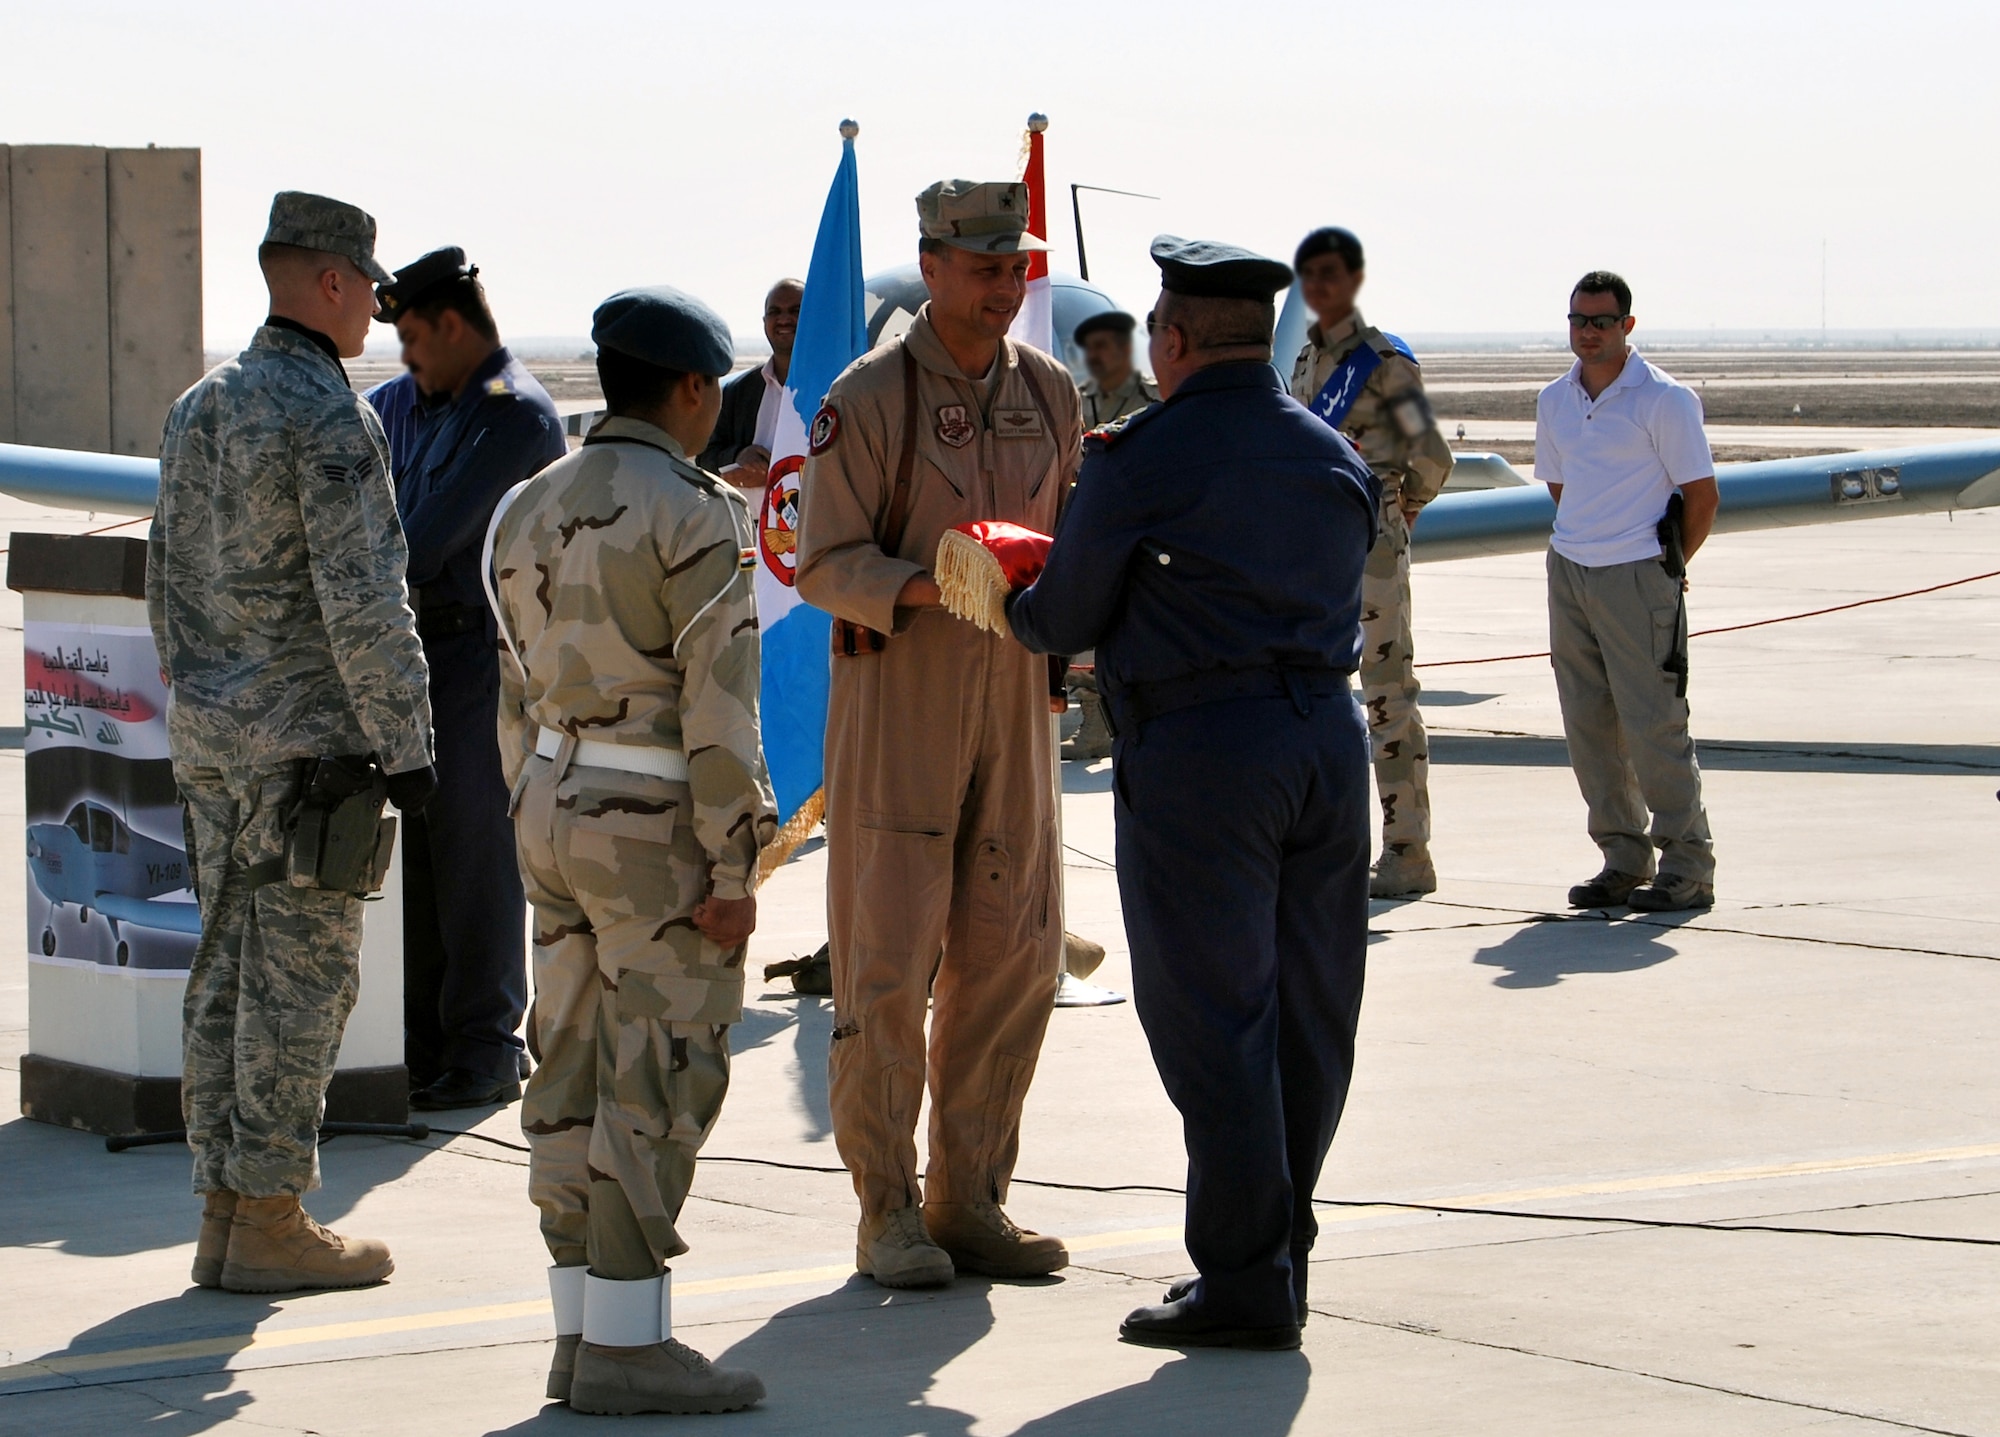 Brig. Gen. Scott Hanson, Commander of the 321st Air Expeditionary Wing and Director of Iraqi Training and Advisory Mission –  Air Force exchanges gifts at Ali Air Base, Iraq, during a ceremony celebrating the arrival of the Iraqi Air Force's Squadron 70 and the grand opening of their new dining facility.  Squadron 70 moved to Ali Base Oct. 17 from Basra. Since the move, Squadron 70 has provided surveillance and reconnaissance support of the Hajj, provided ISR support for Iraqi Security Forces and secured Iraqi’s vital infrastructure and borders.(U.S. Air Force photo by Staff Sgt. Eric Donner)